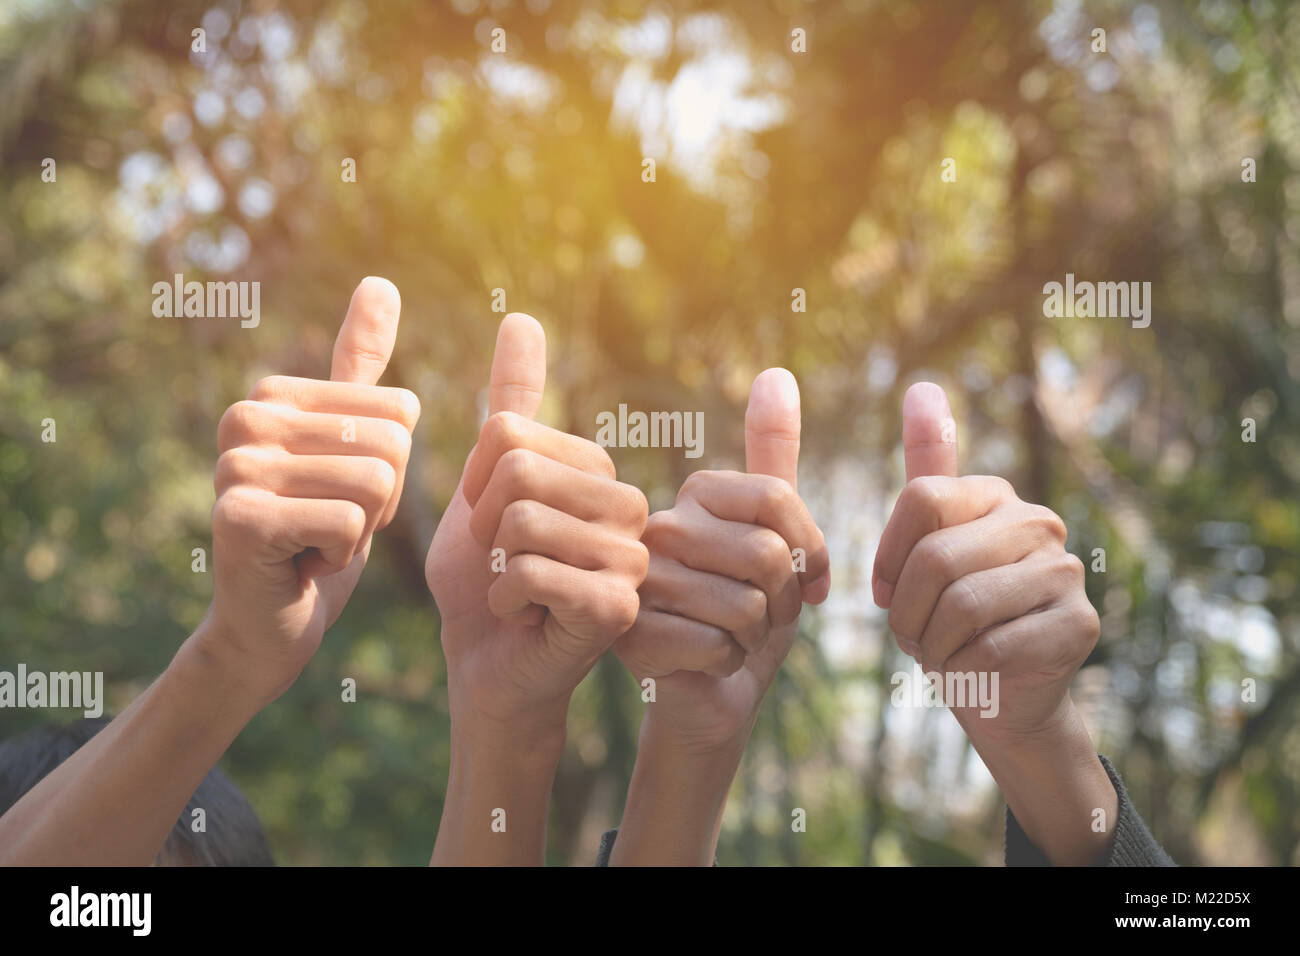 Hand of people shows the gesture of thumps up on nature background. Stock Photo